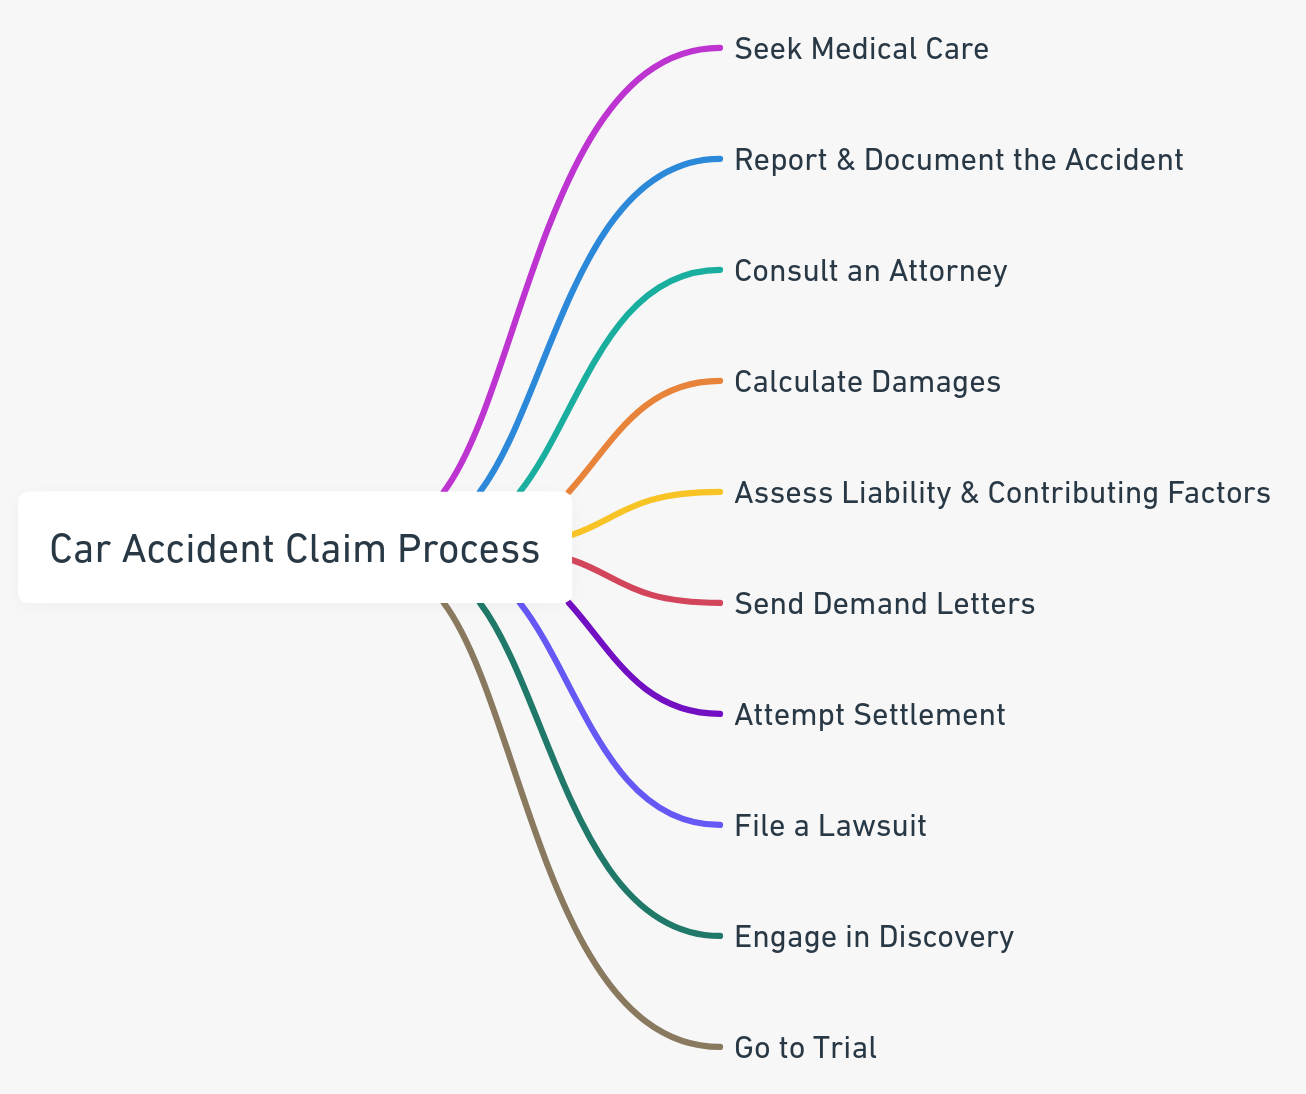 Mind map outlining the key steps in the car accident claim process.